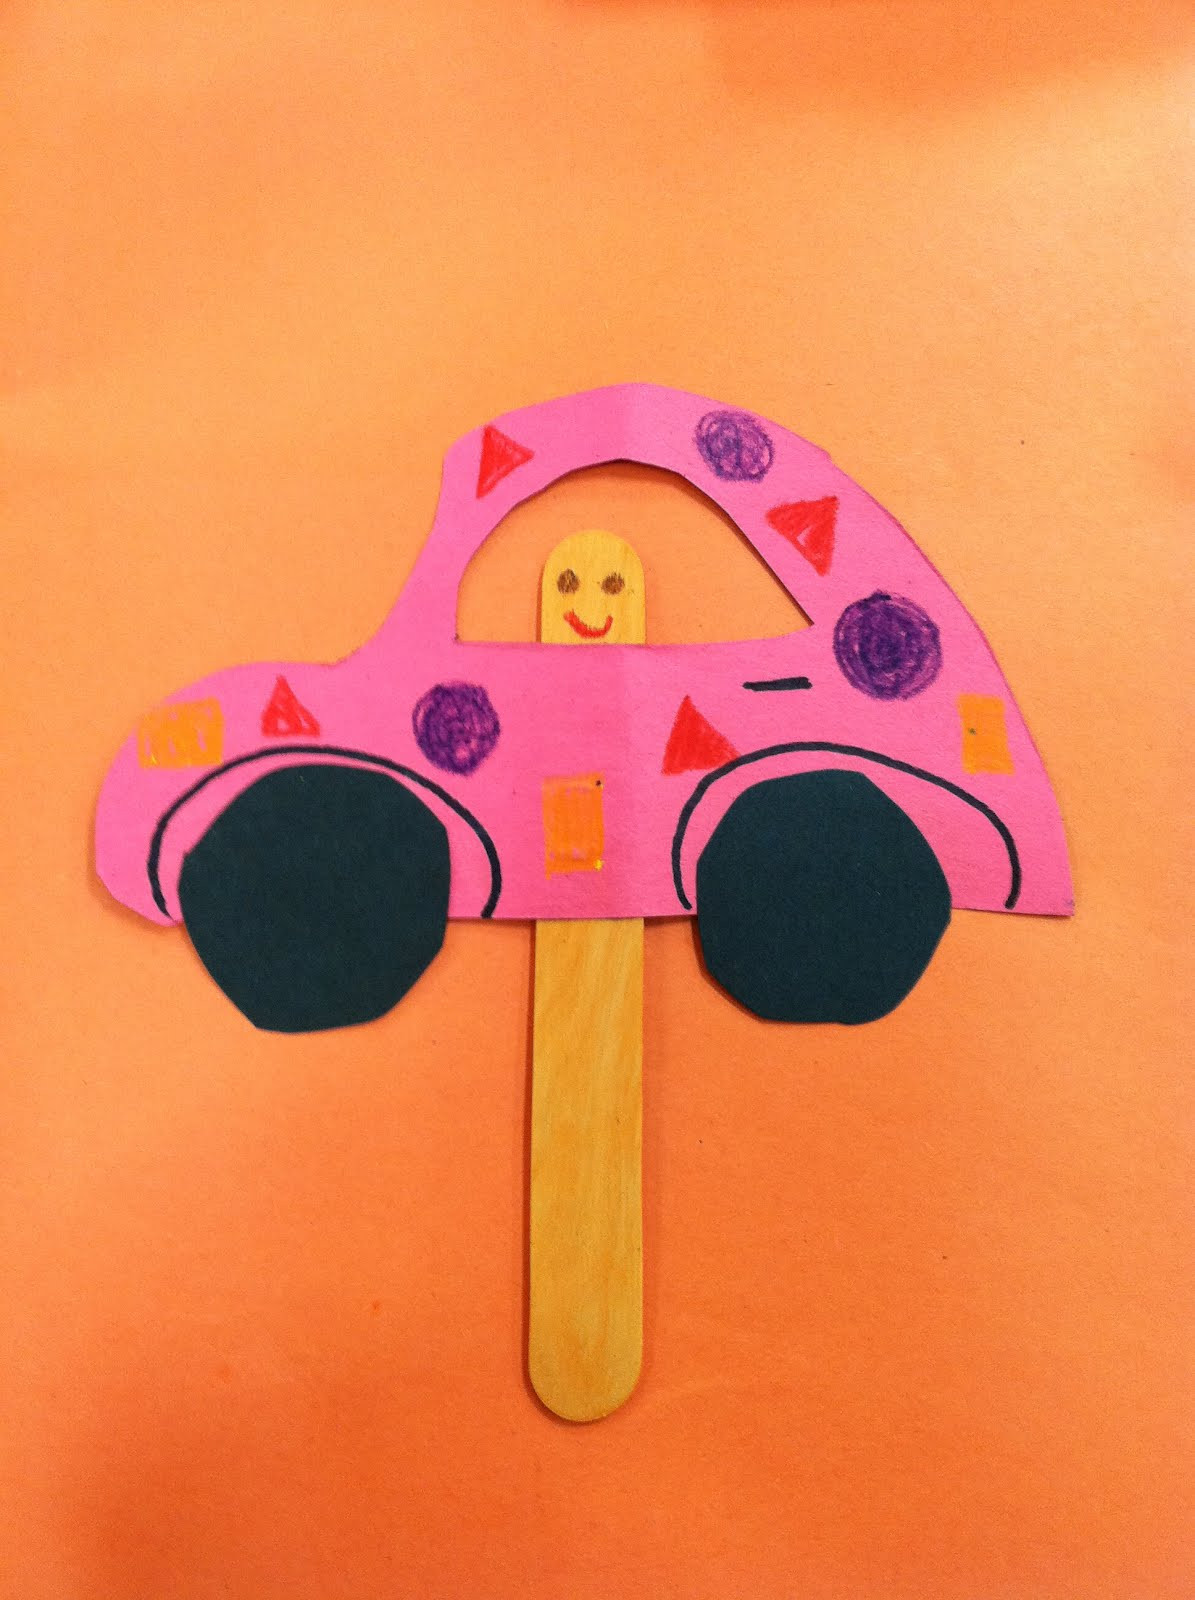 Arts And Crafts Activities For Preschoolers
 In the Children s Room Theme Thursday Cars Cars Cars